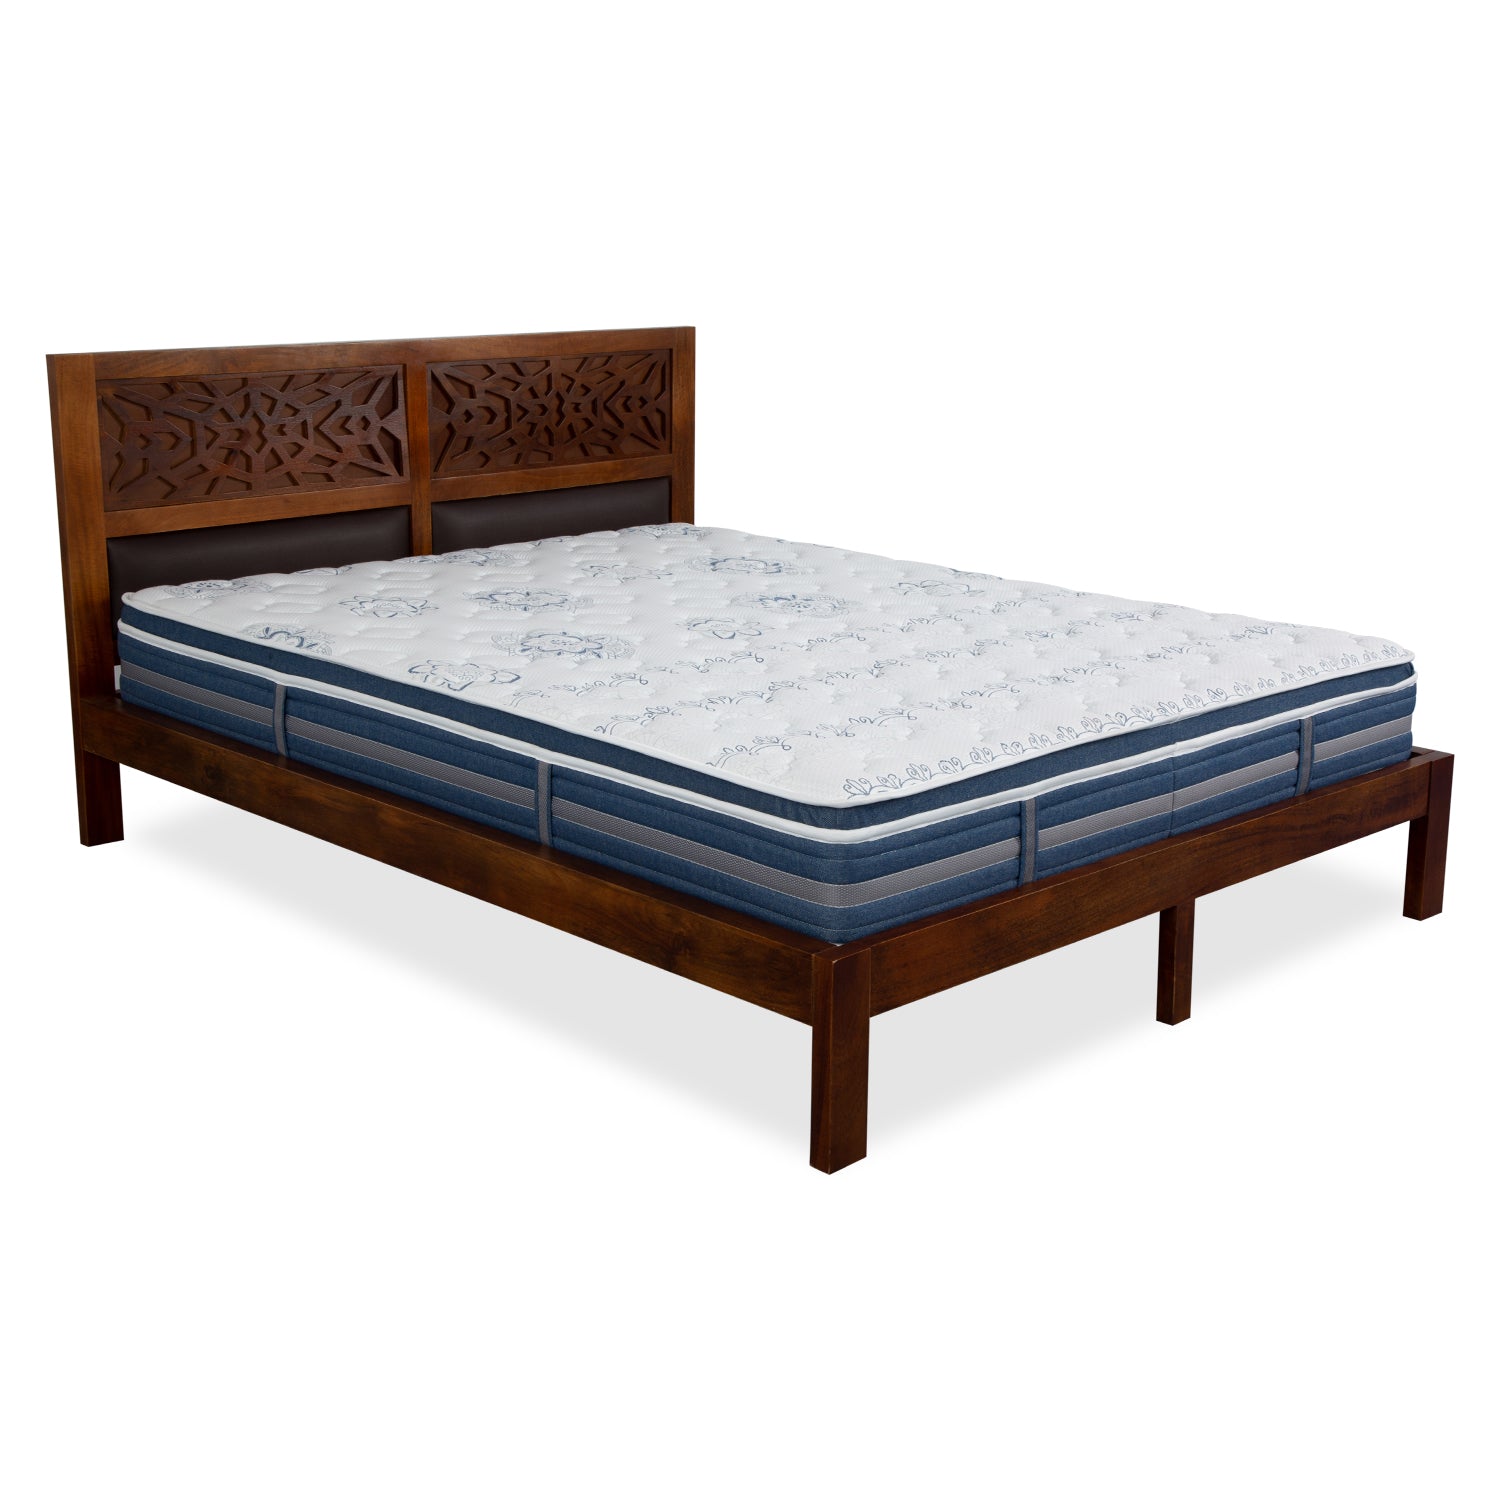 Vibrant Box Top 6 + 2 inch King Bed Spring Mattress (White & Blue)